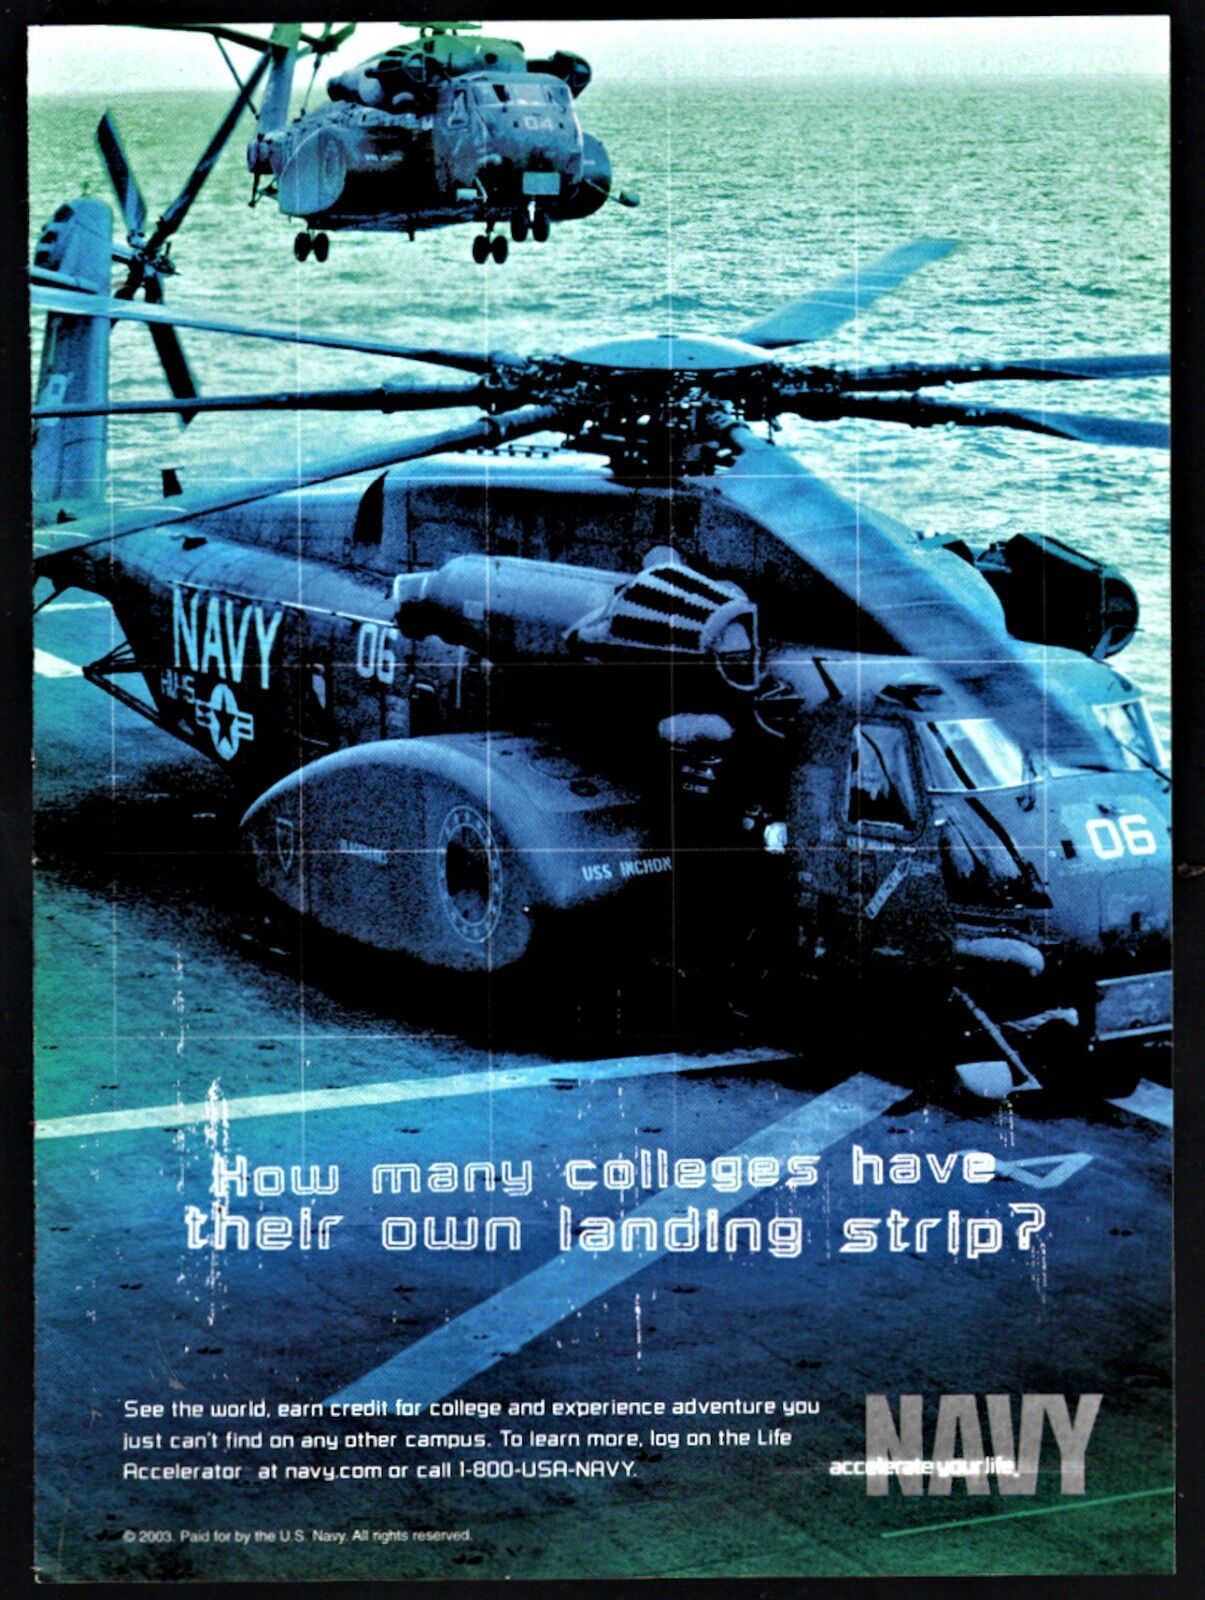 2003  SIKORSKY CH-53E Super Stallion Helicopter U.S. NAVY Carrier Recruiting AD